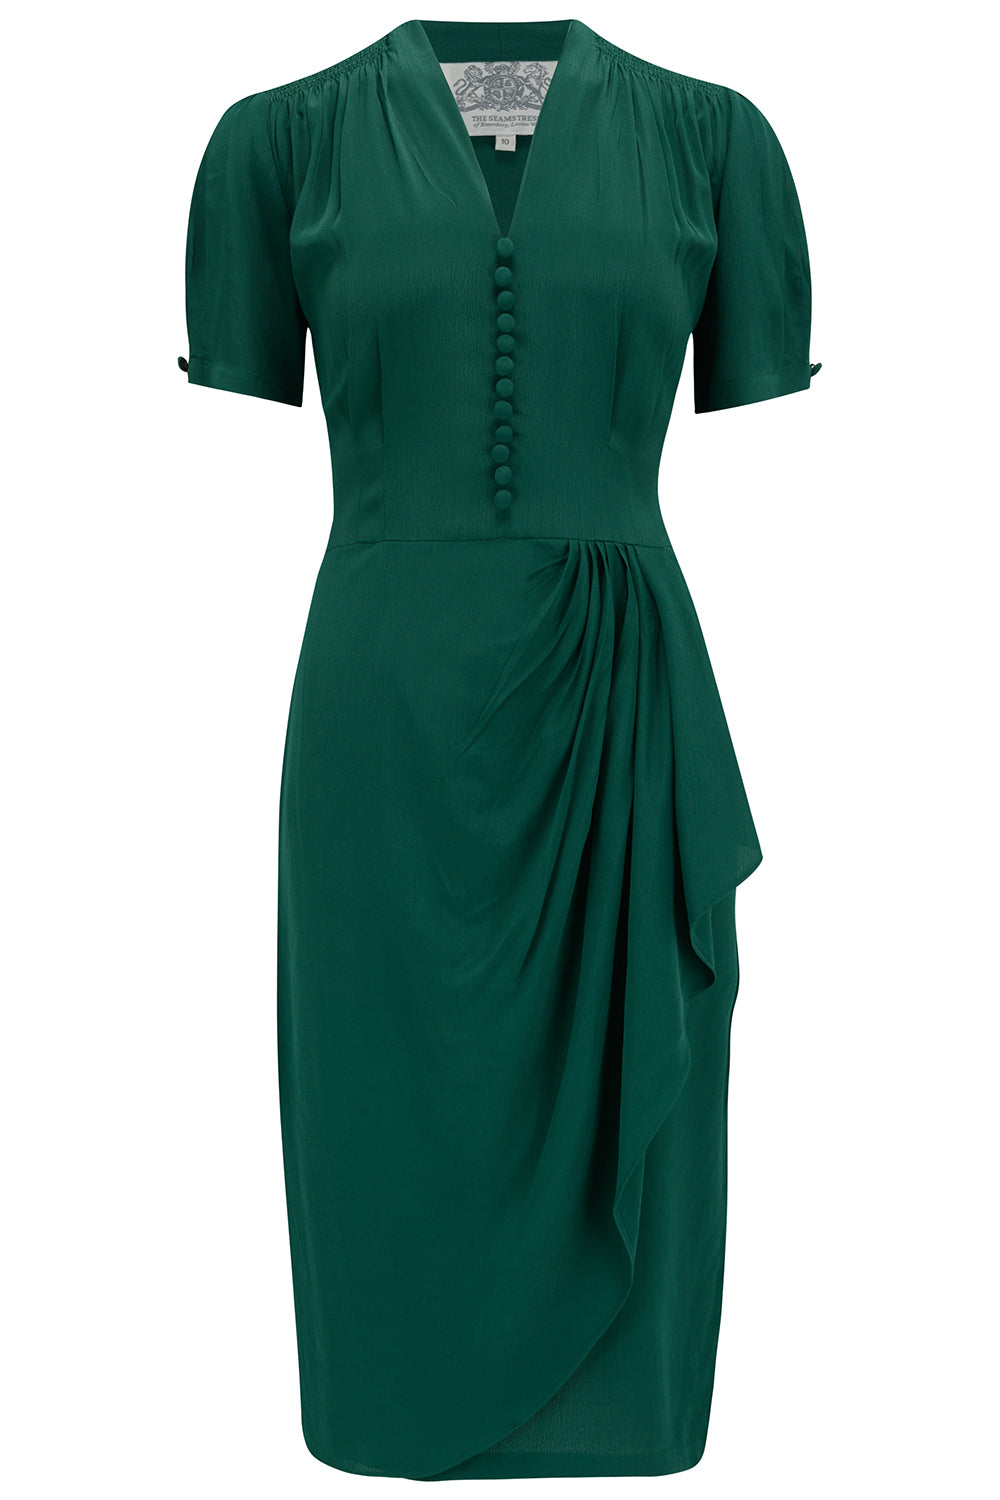 1940s Dresses and Clothing UK | 40s Shoes UK Mabel Dress in Solid Green  A Classic 1940s True Vintage Inspired Style £79.00 AT vintagedancer.com